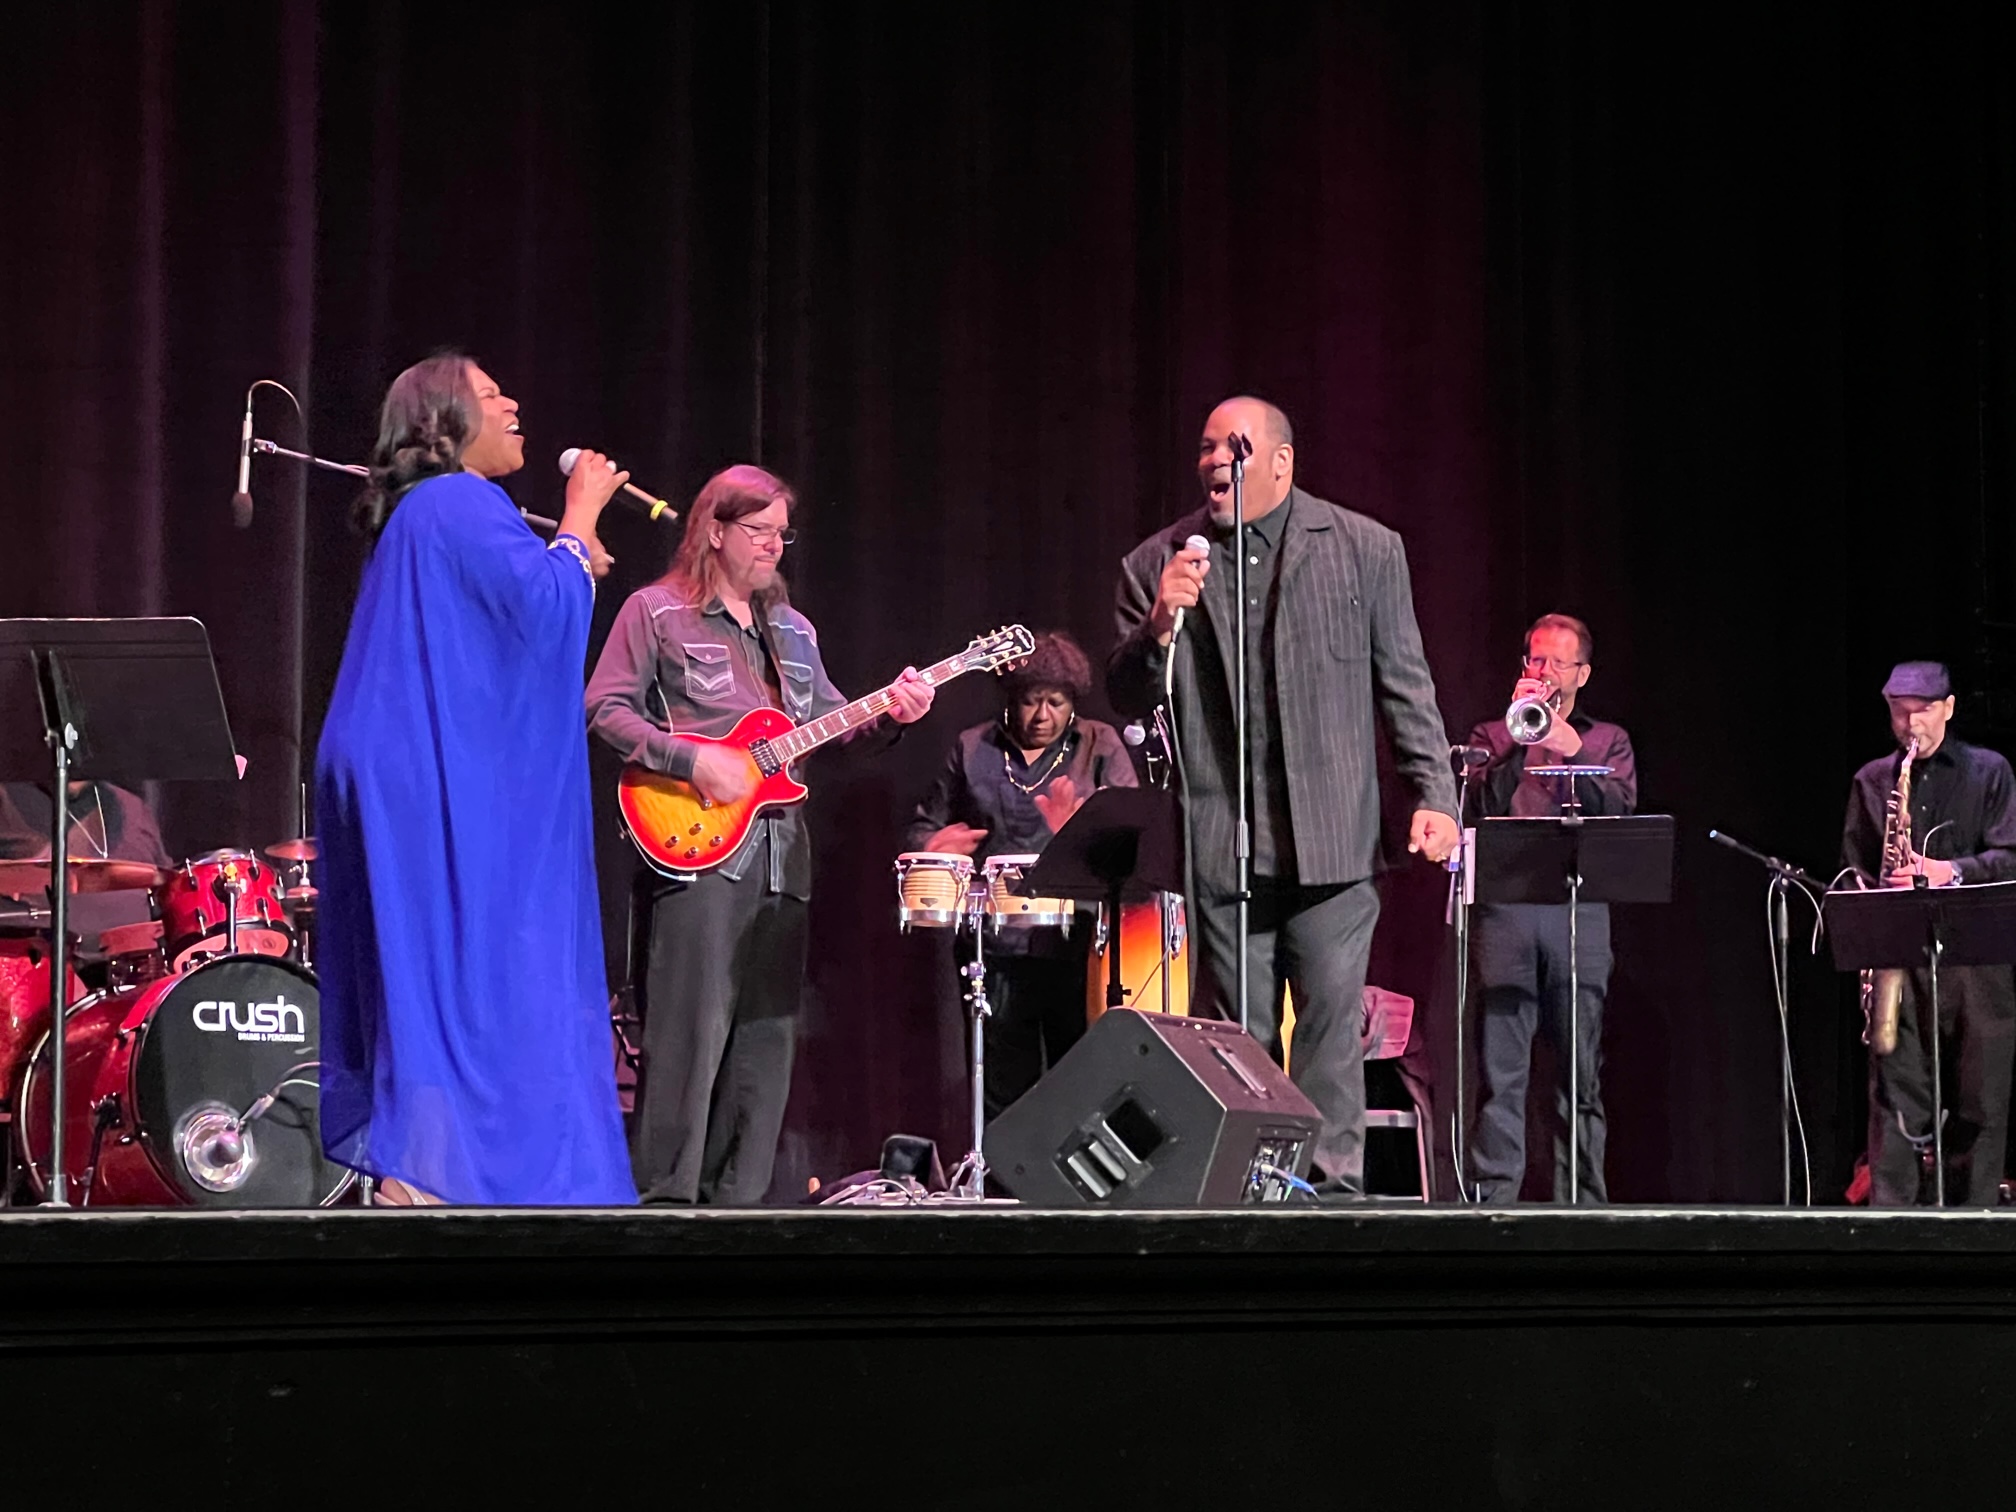 A Black woman in a flowing royal blue gown and a Black man in a black suit jacket, shirt, and pants, are facing each other on a stage, singing into microphone. In the background there is a white man with long hair playing a guitar. Also visible is a drum set, a Black woman playing bongos, and a white men playing a saxophone and trumpet. Photo by Julie McClure.